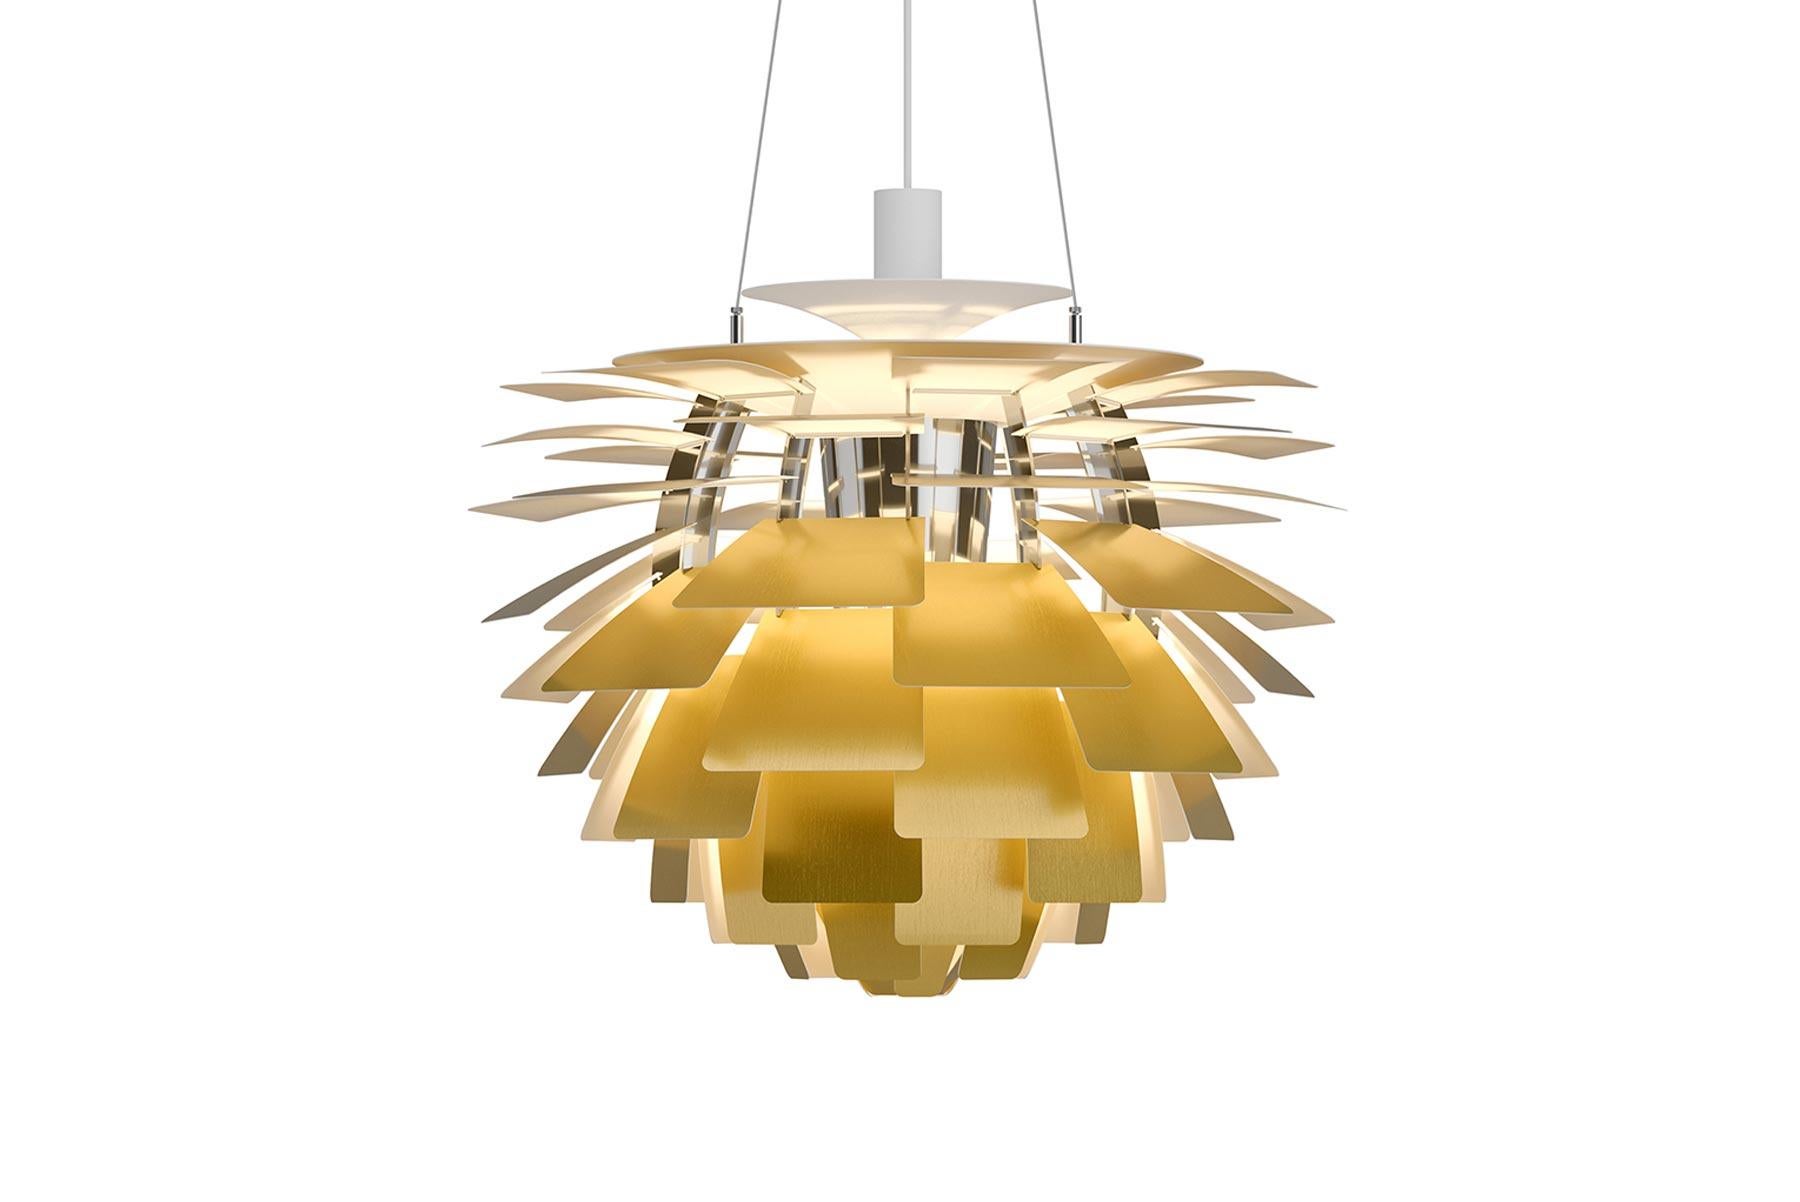 The fixture provides 100% glare-free light. The 72 precisely positioned leaves form 12 unique rows of six leaves each. They illuminate the fixture as well as emitting diffused light with a unique pattern. The fixture provides decorative and